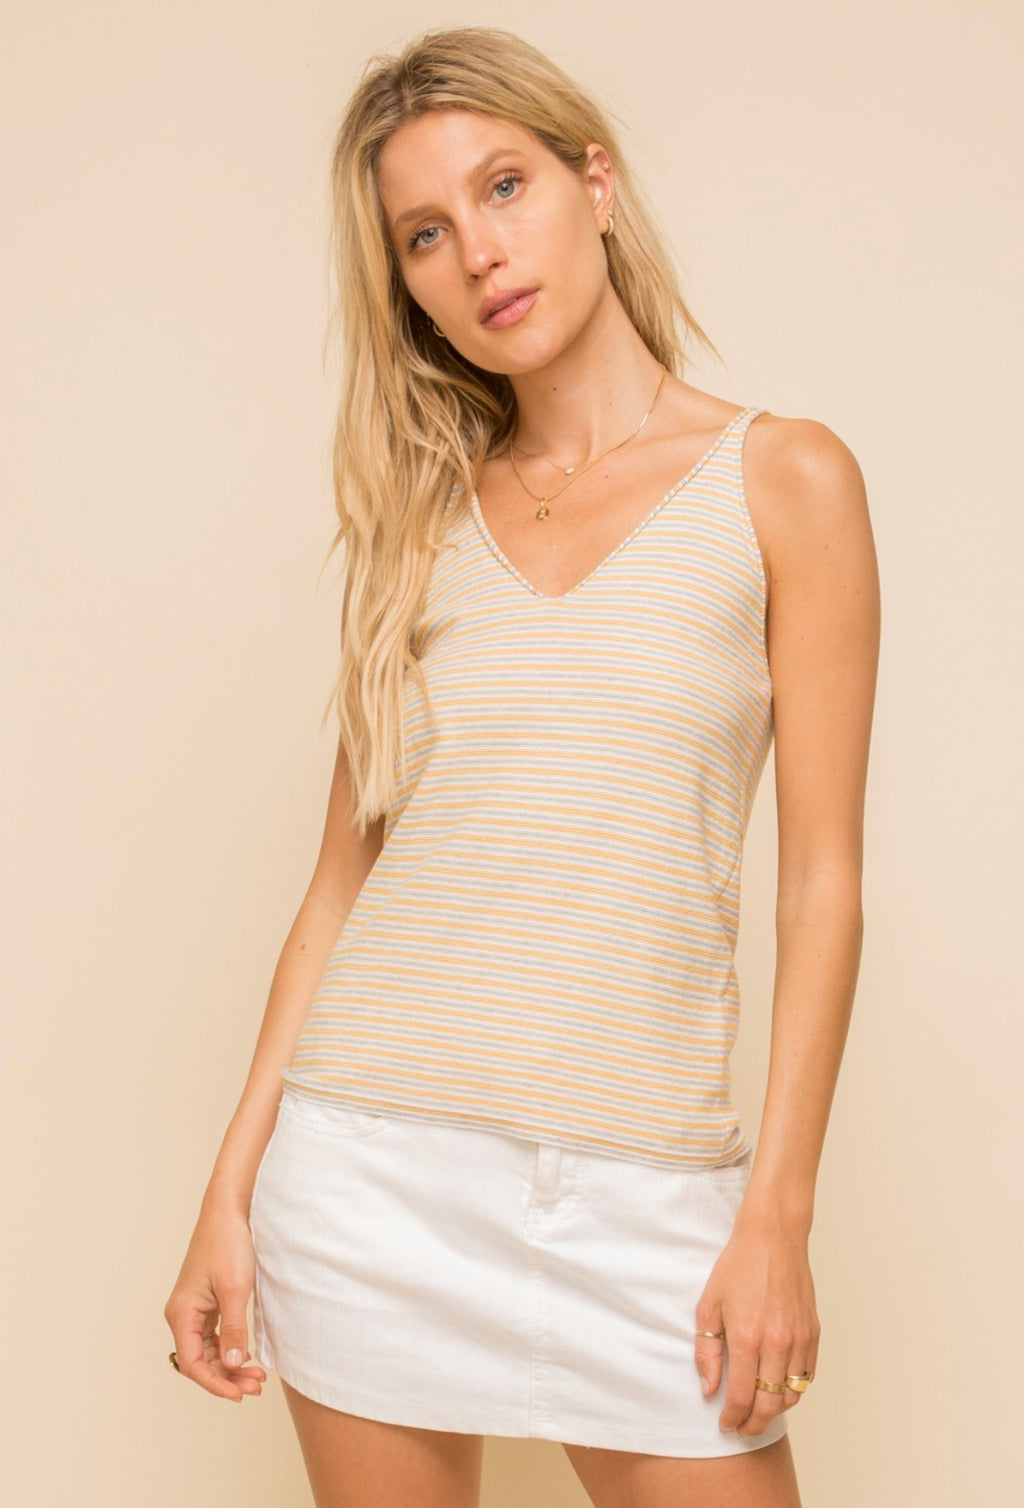 Mustard and gray striped tank